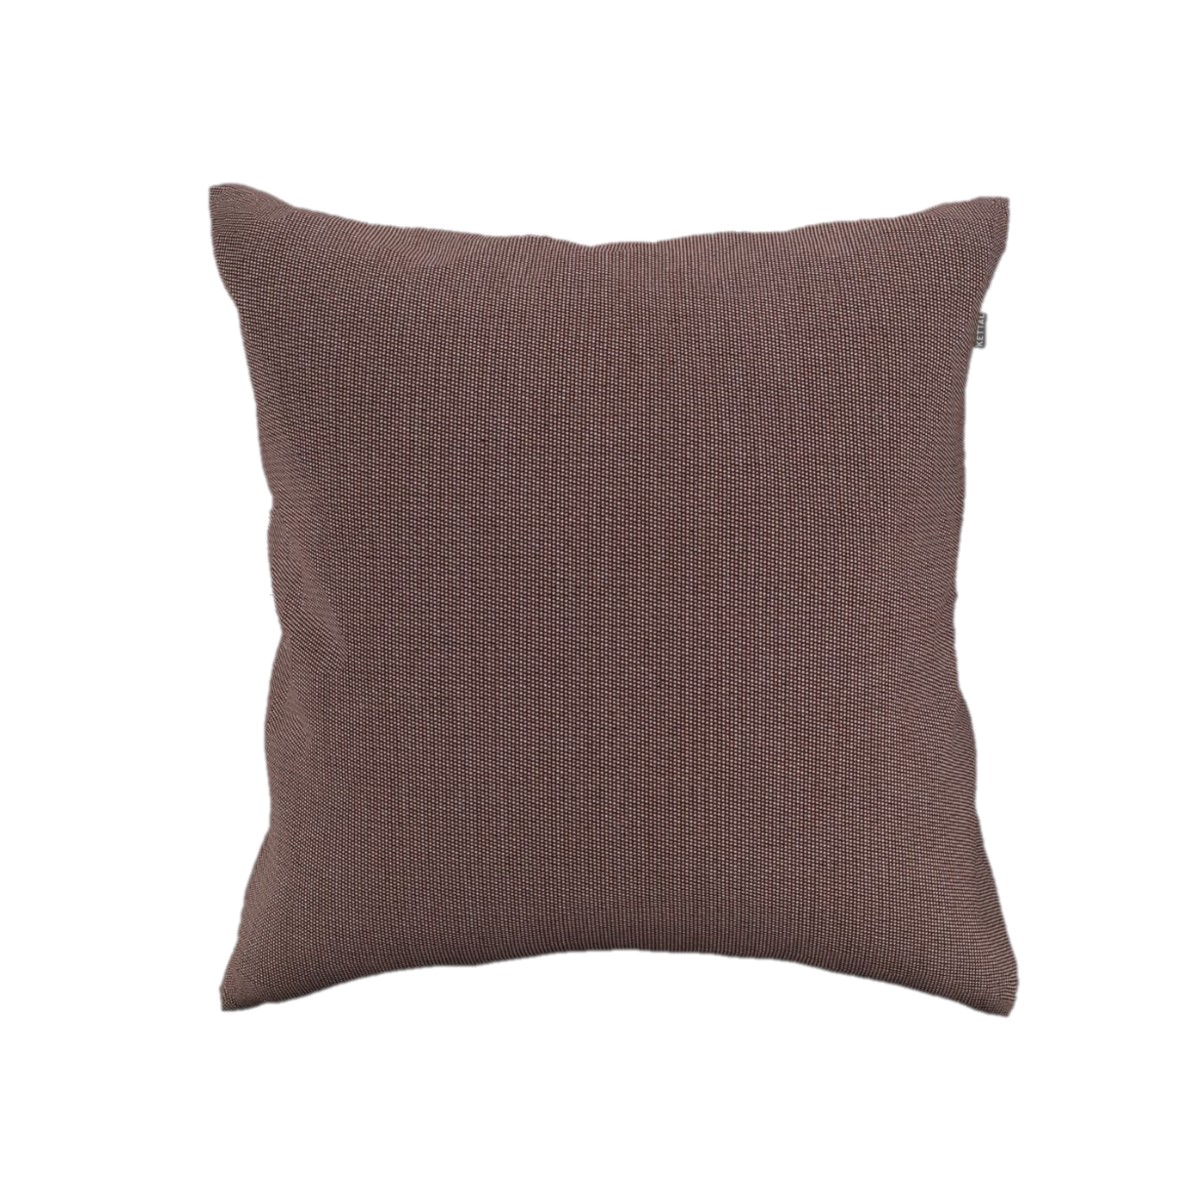 Product Image Objects Cushions Square